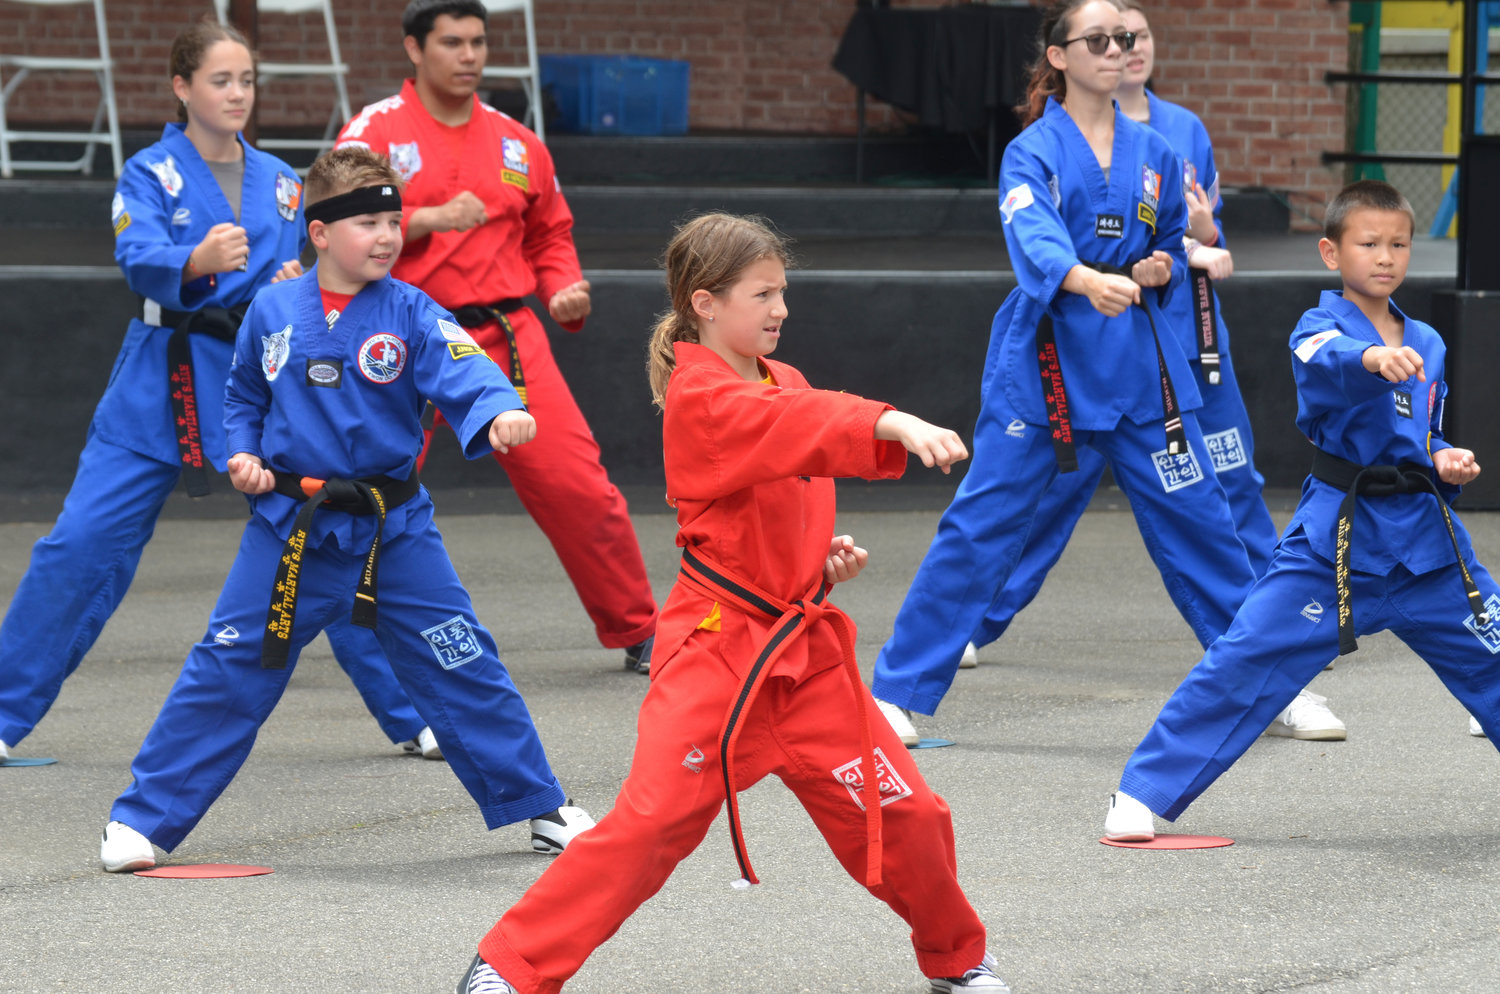 For the first time since 2019, East Rockaway hosted the Huckleberry Frolic last Saturday in Memorial Park. Emily Butler, 9, showed off her karate skills.